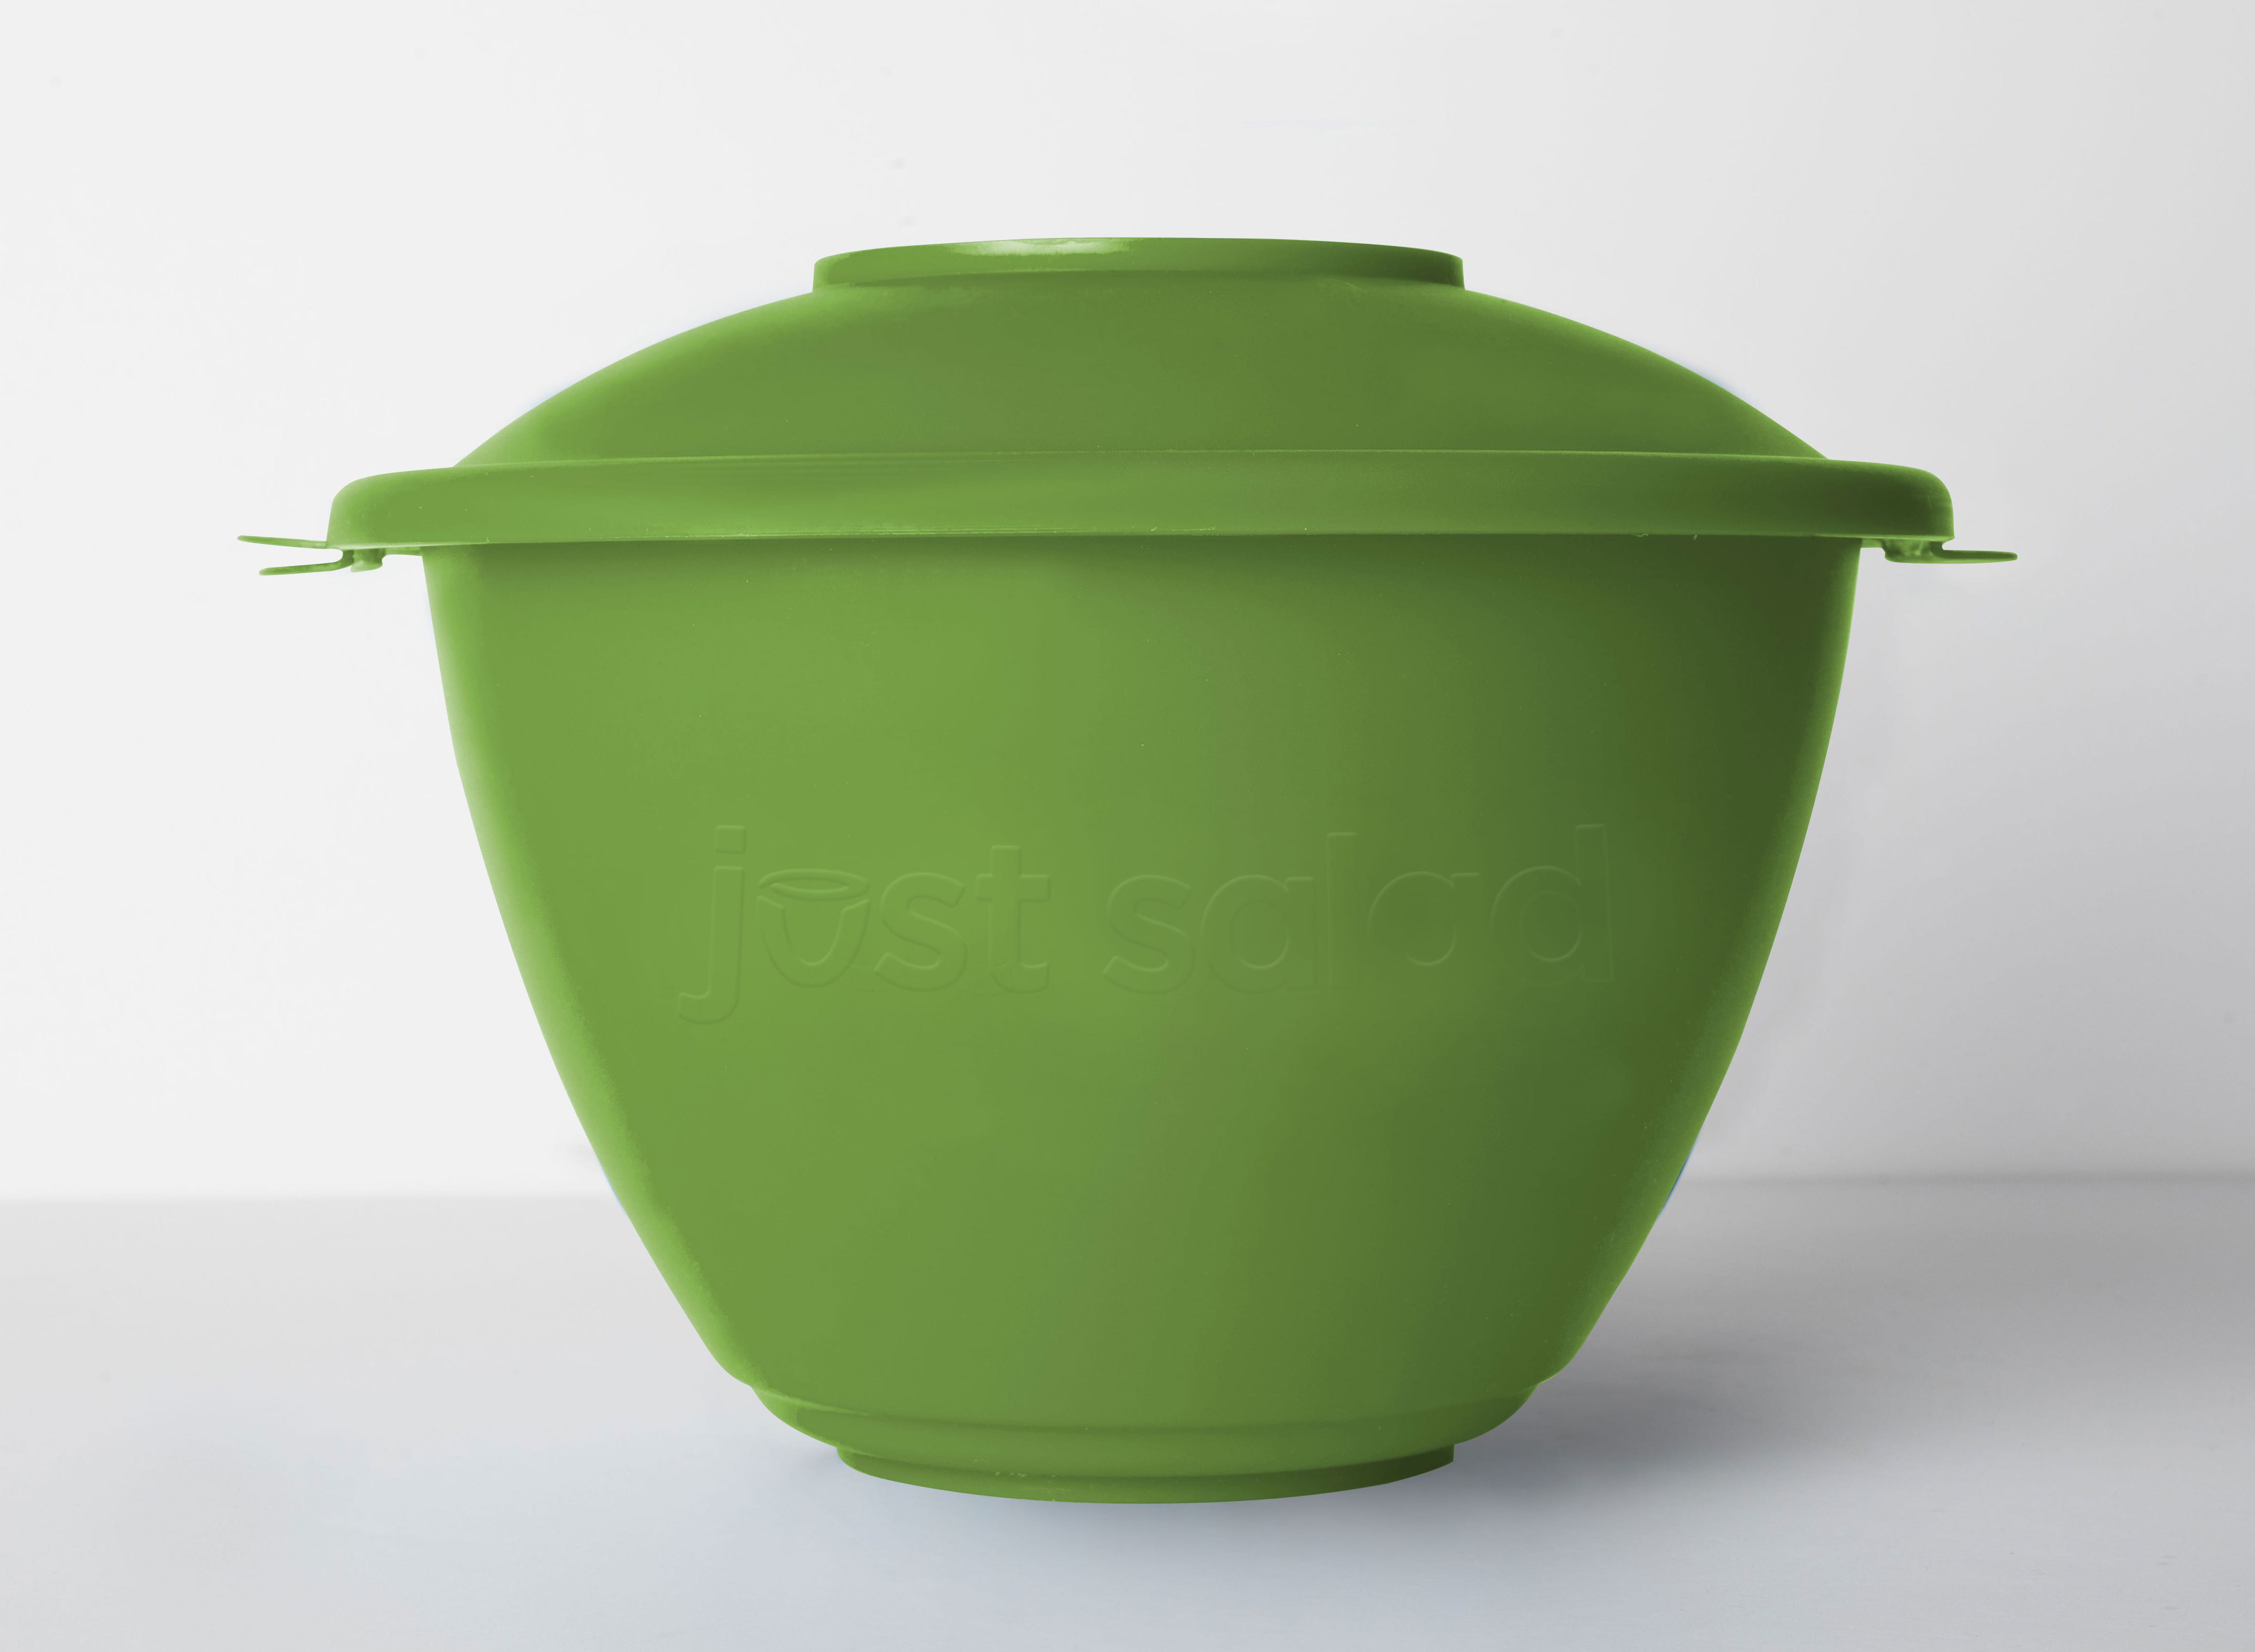 You Can Get a Month of Just Salad With This $99 Reusable Bowl